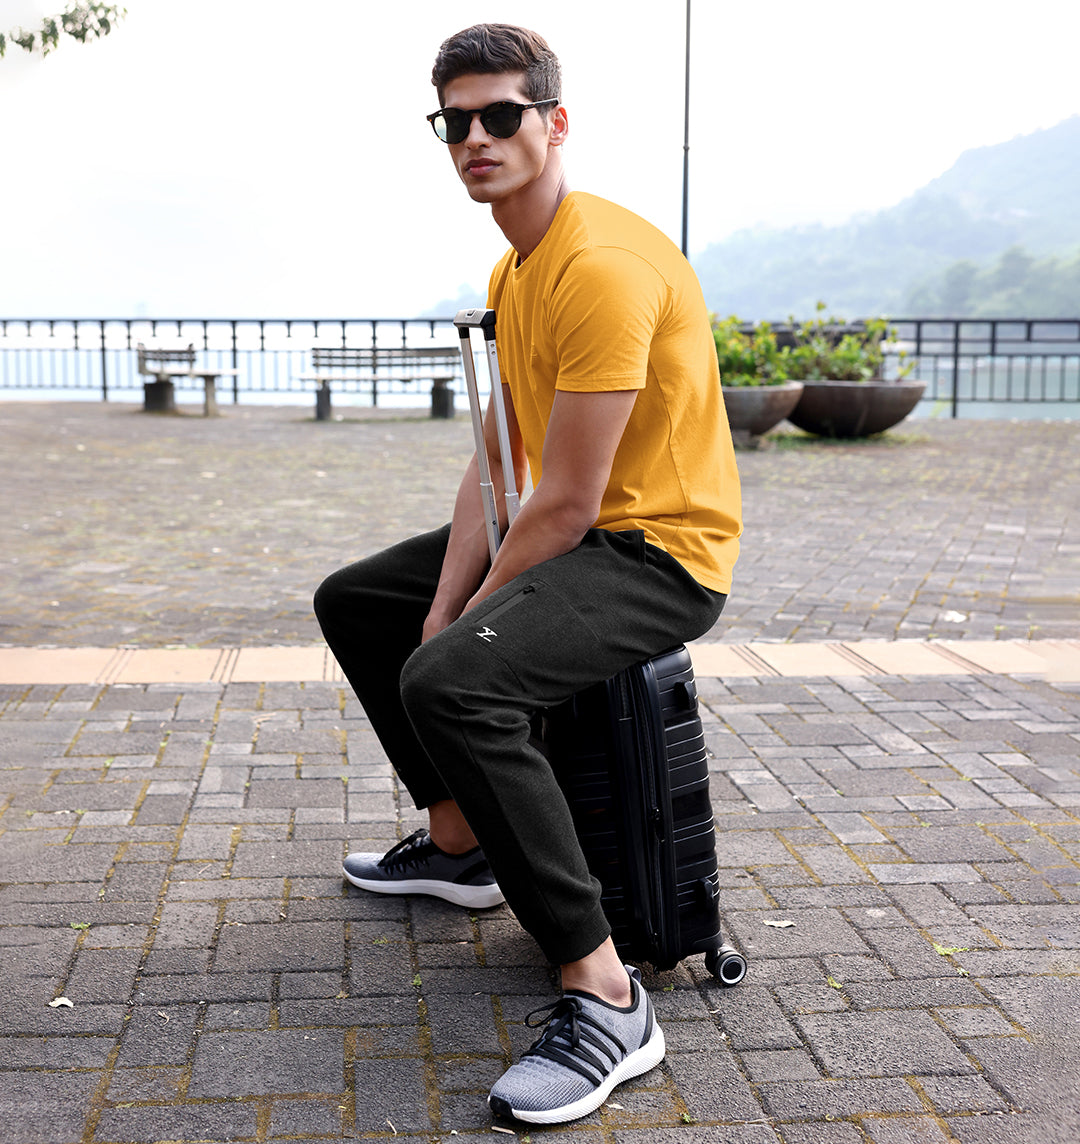 blog-article-image-travelling-on-a-budget-affordable-and-trendy-outfit-ideas-for-men